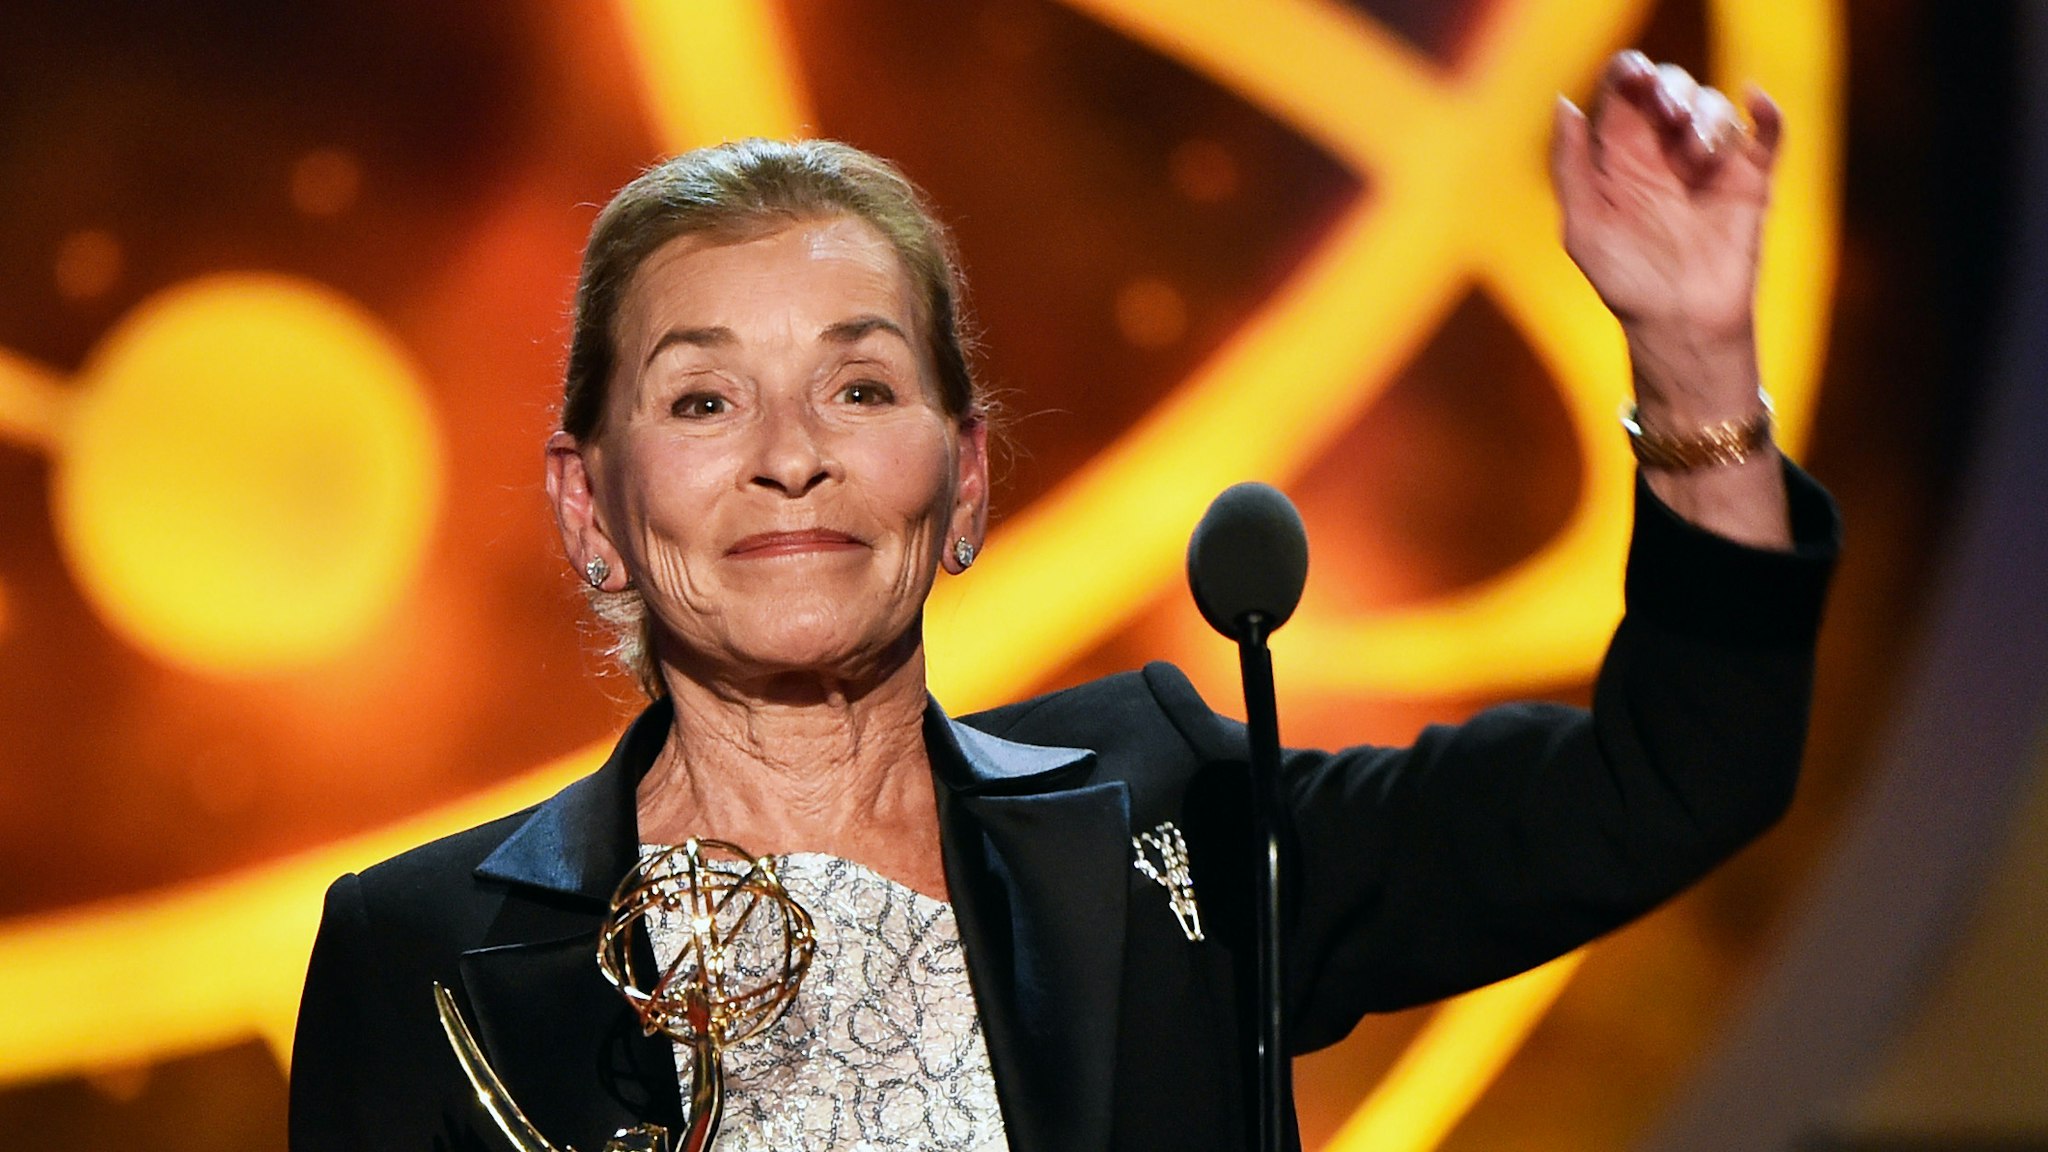 Judge Judy accepts the Lifetime Achievement Award onstage at the 46th annual Daytime Emmy Awards at Pasadena Civic Center on May 05, 2019 in Pasadena, California. (Photo by Alberto E. Rodriguez/Getty Images)